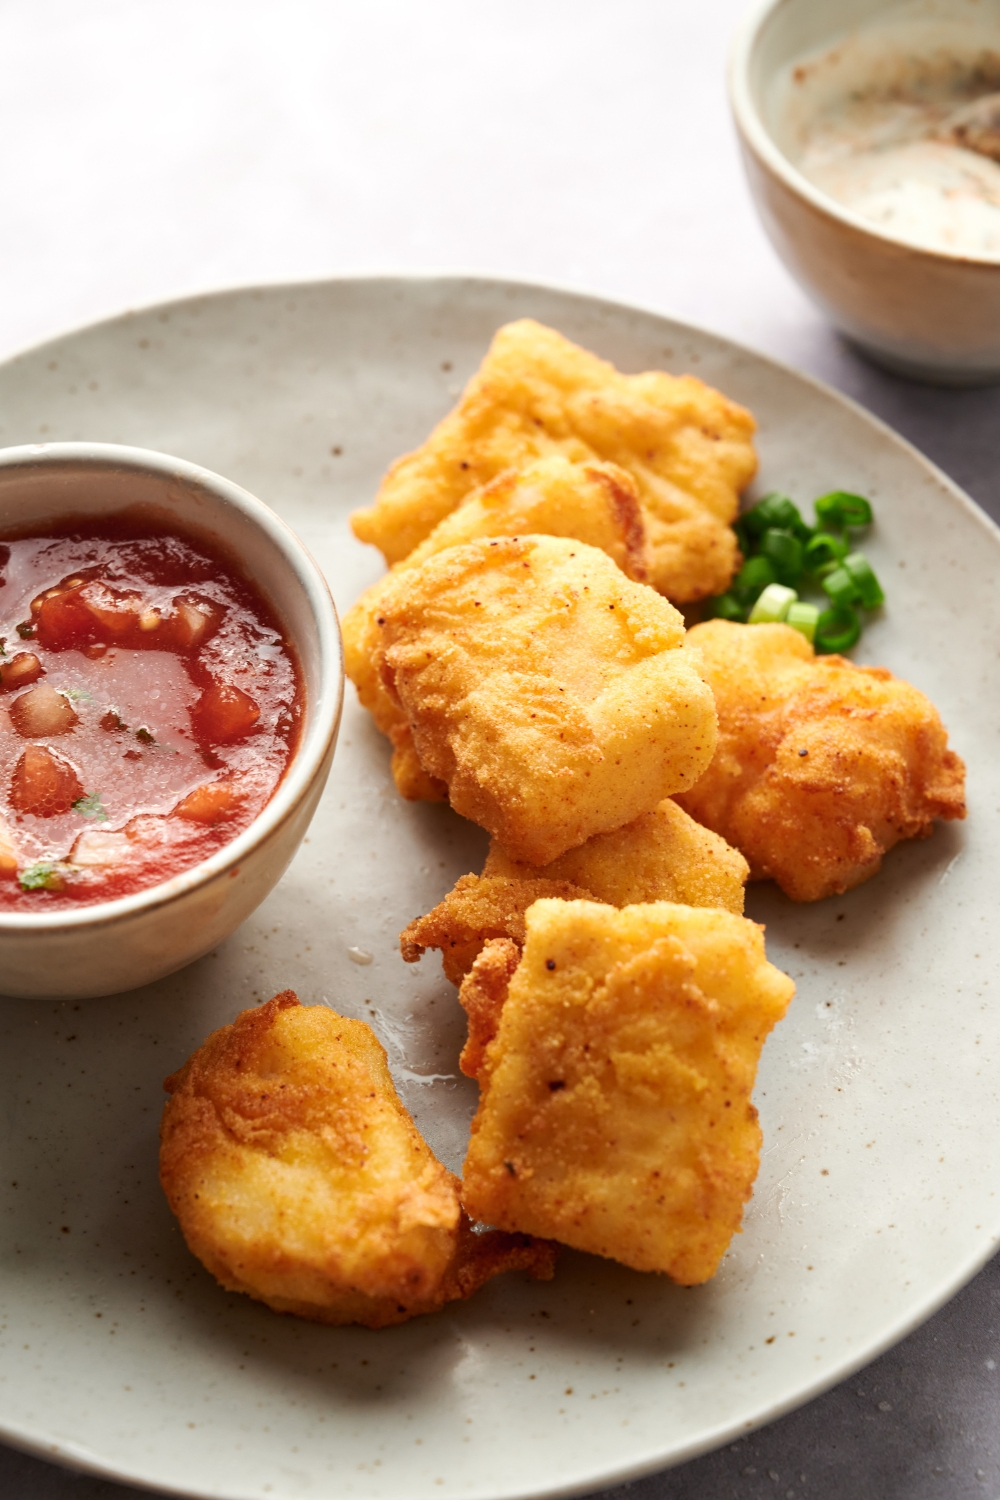 Golden brown catfish nuggets on a serving plate with a bowl of dipping sauce and chopped chives.